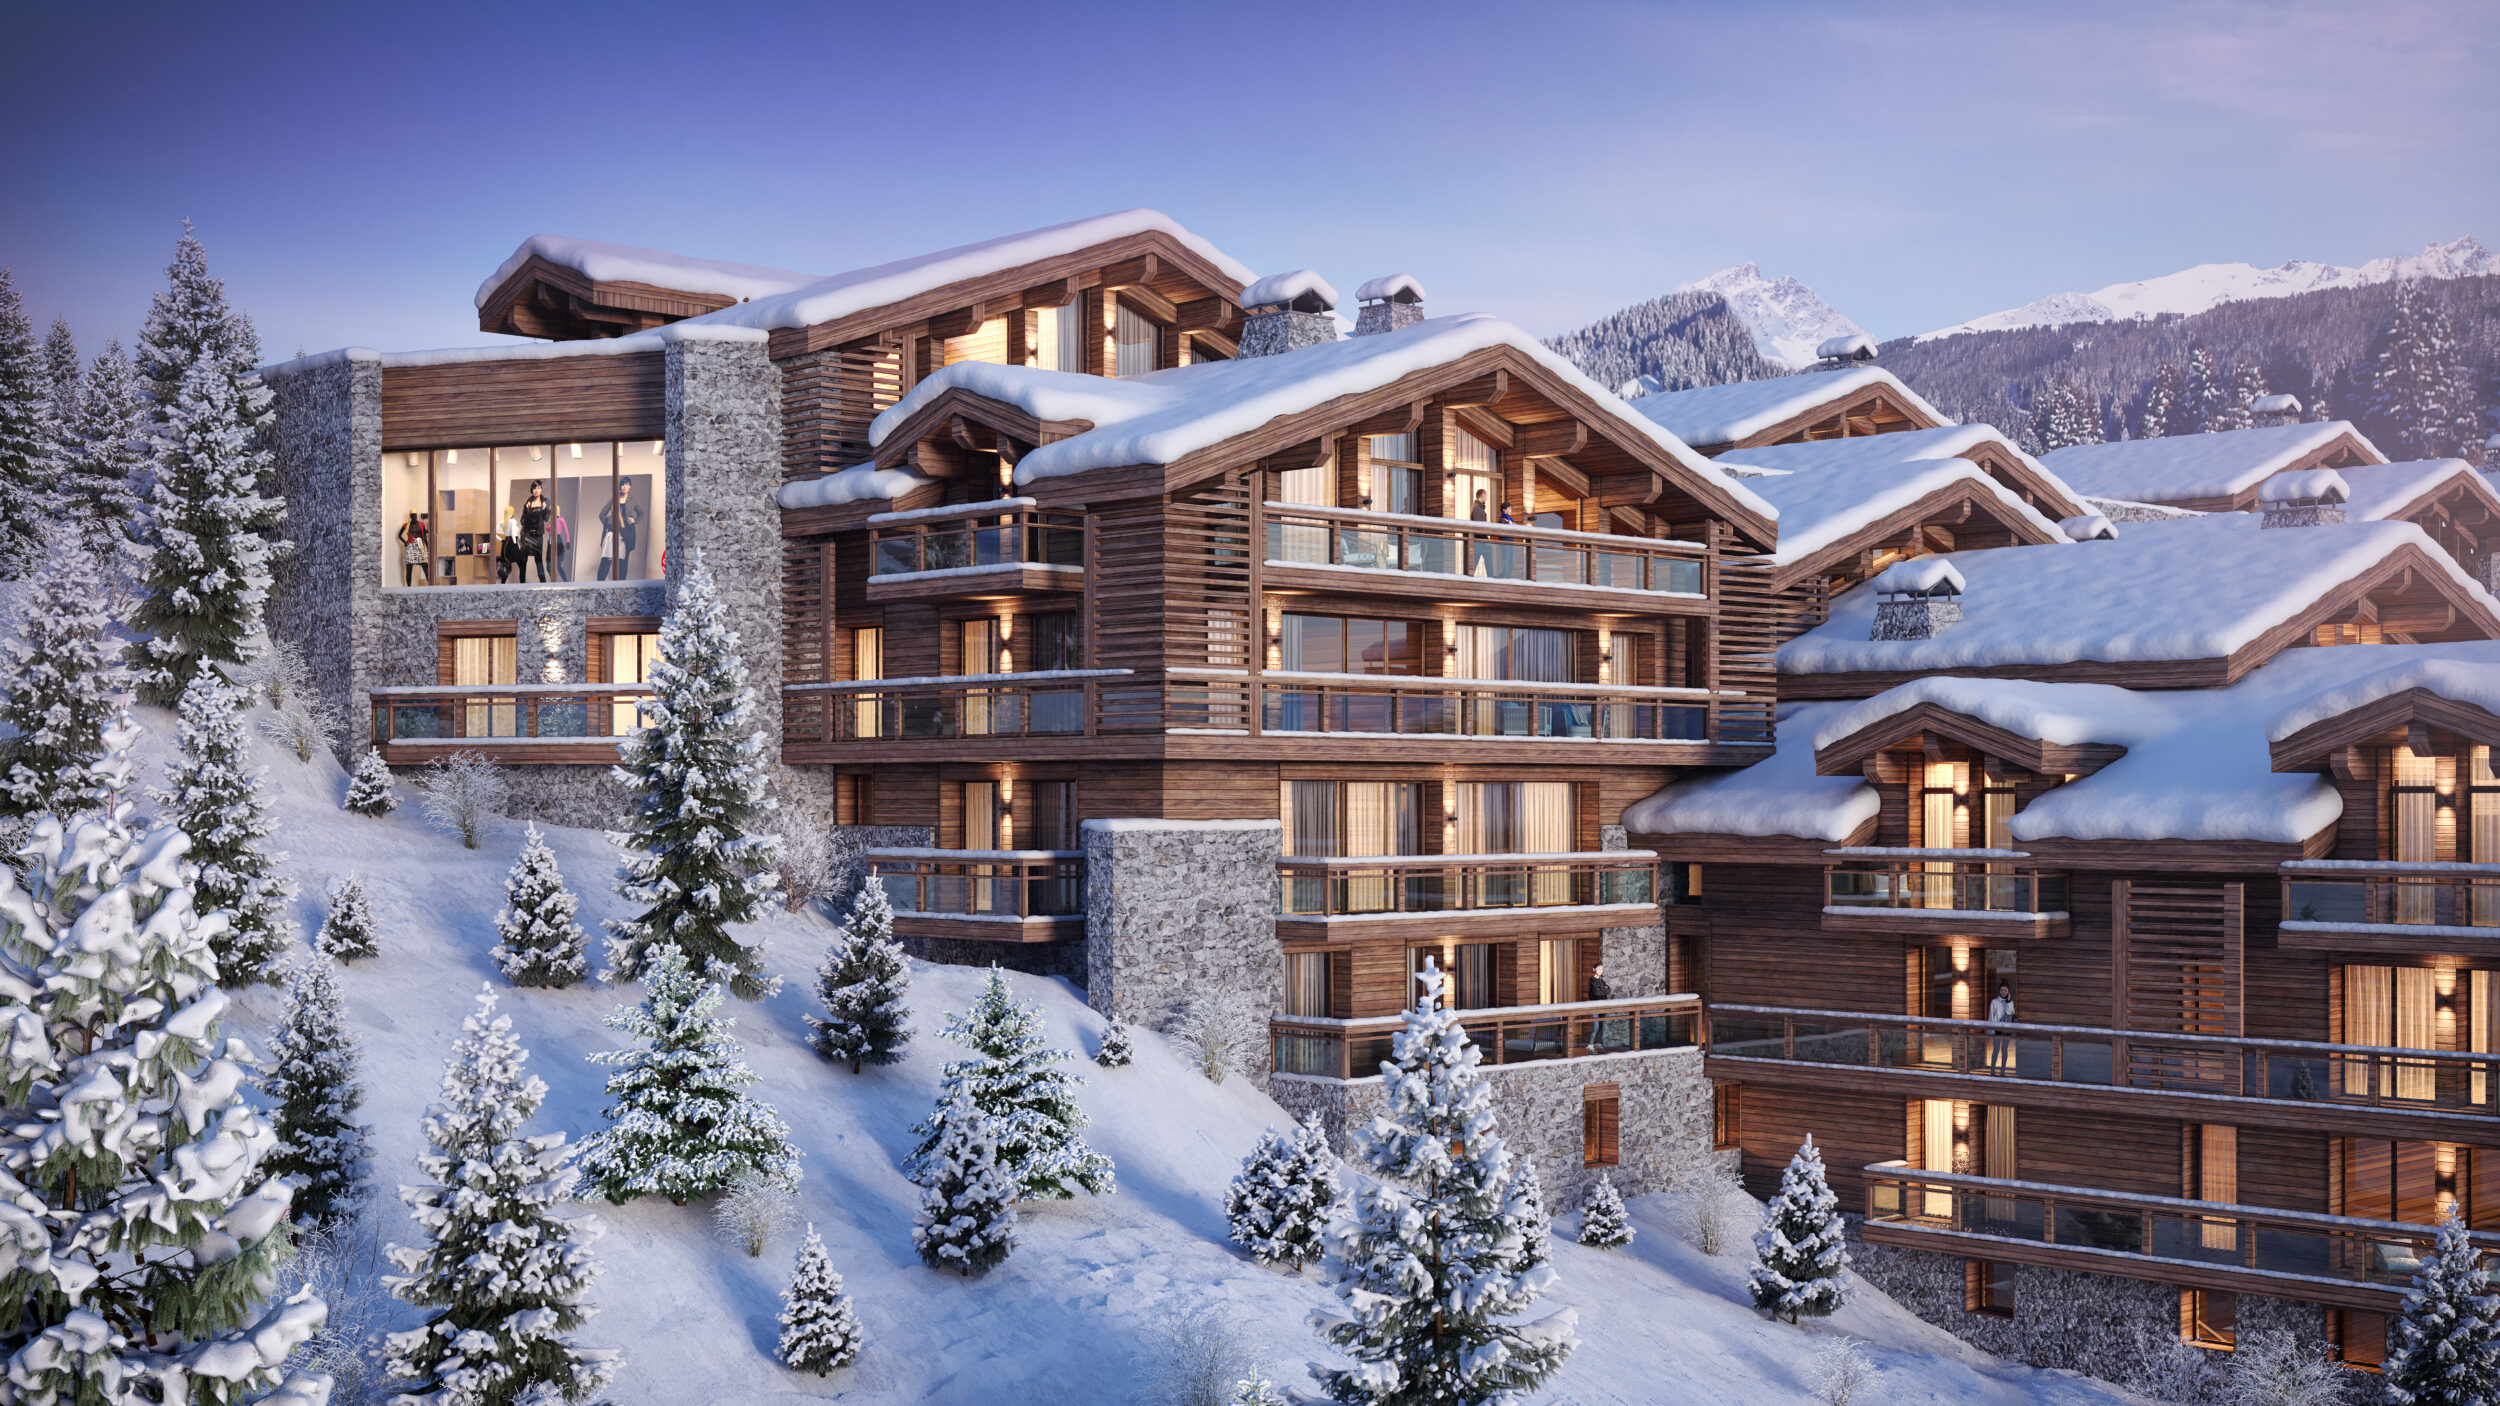 Snowy mountain exterior 3D rendering